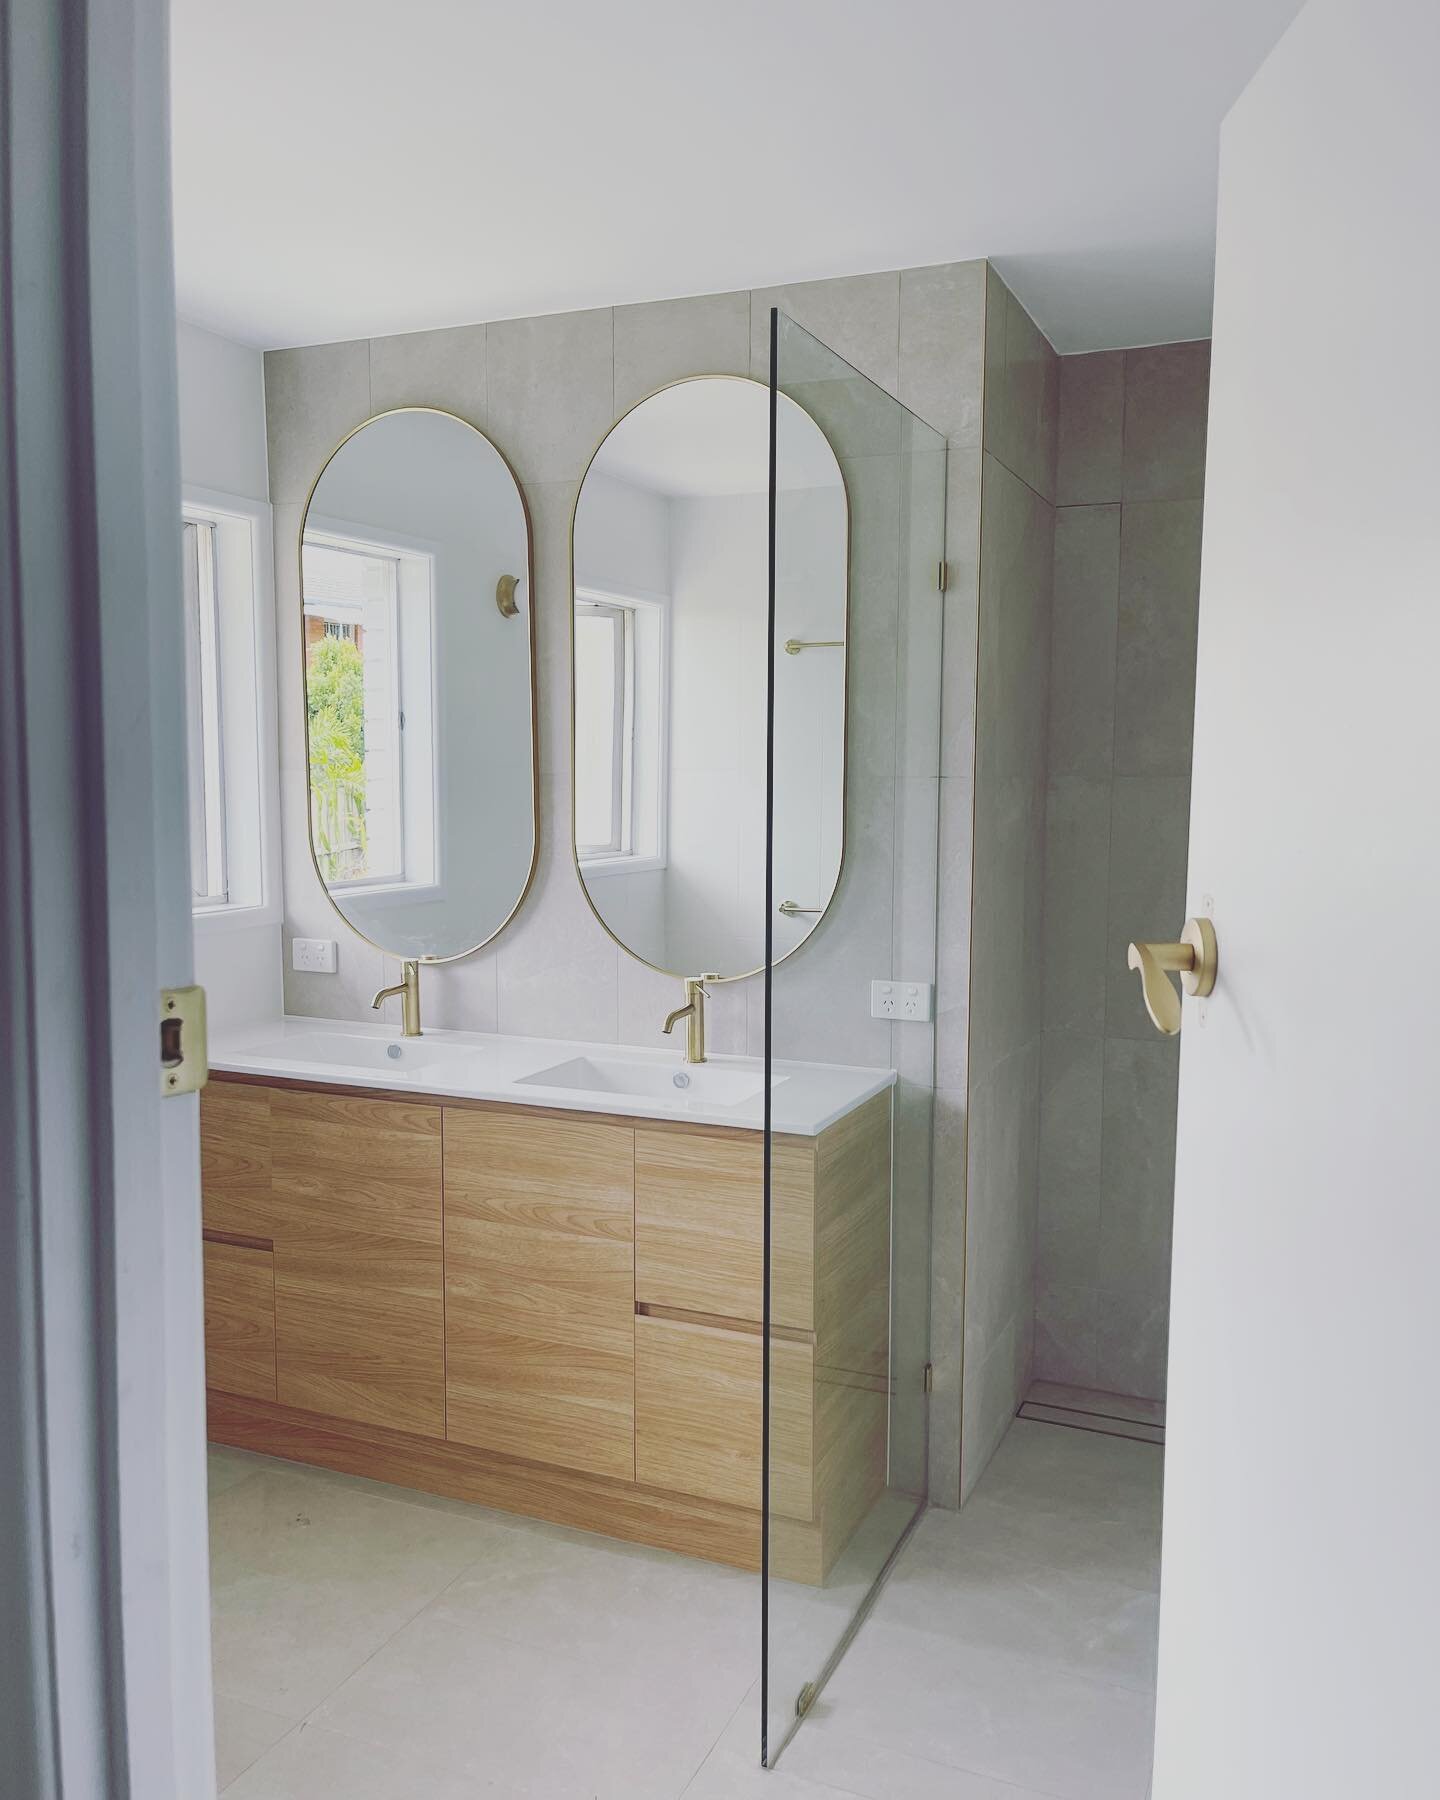 Before and after, our latest bathroom renovation! Swipe to see the incredible transformation.

Our team at Gold Star Bathrooms recently completed a stunning bathroom renovation that involved moving the vanity from under the window to an adjacent wall